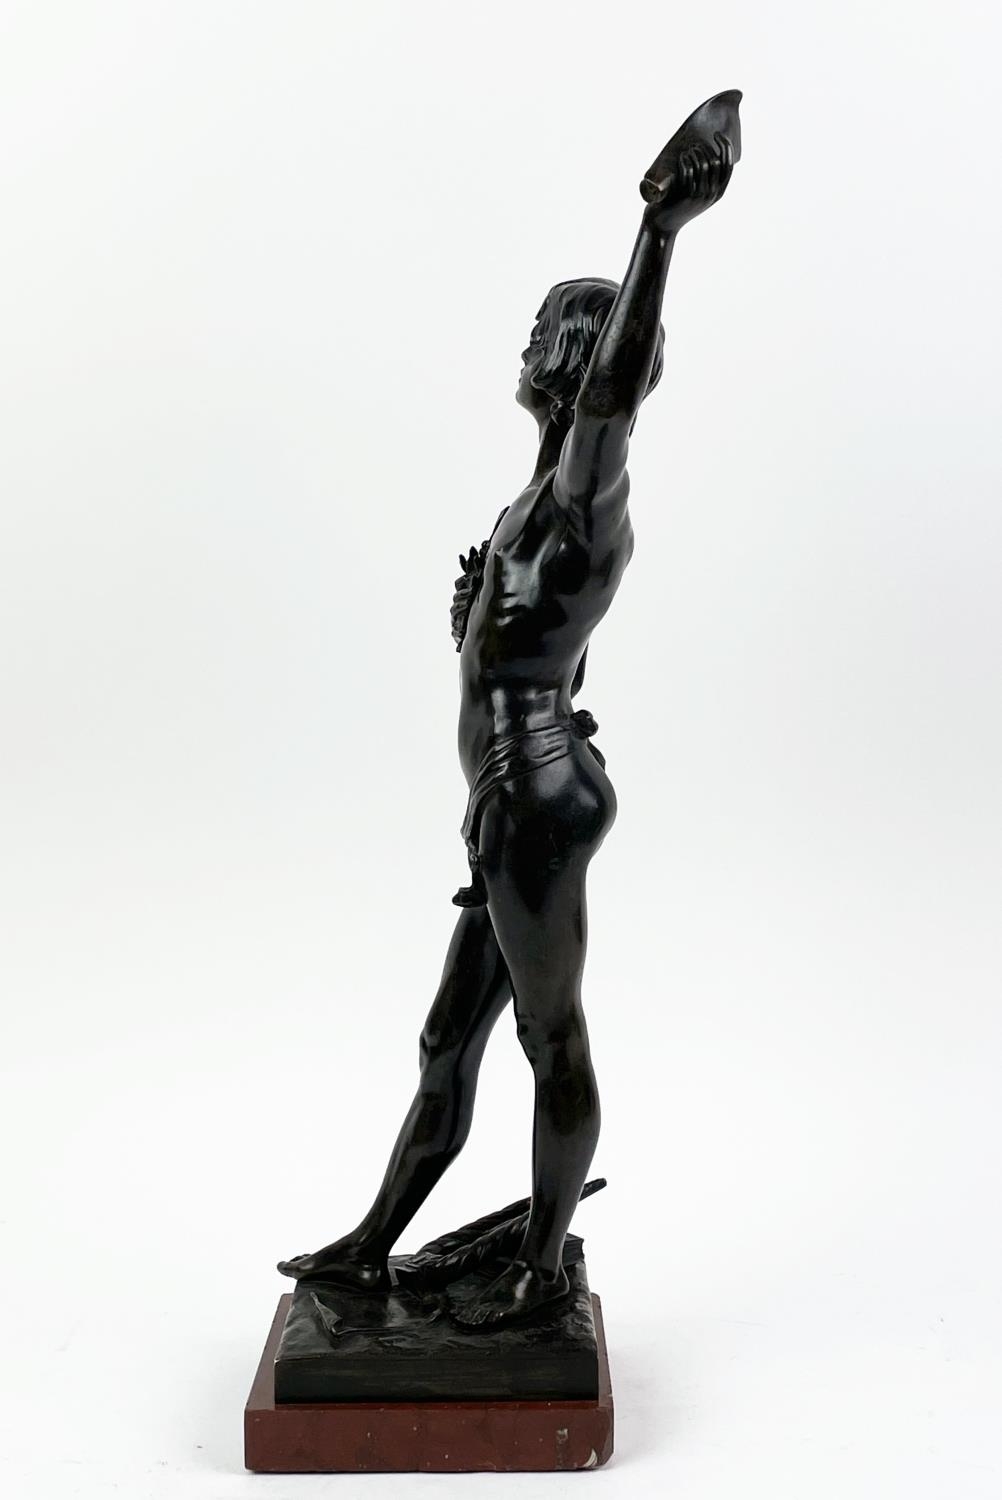 BRONZE FIGURE, ANGLES CANE (1859-1911), 'Premier triumphe', mounted on a rouge marble plinth base, - Image 5 of 8